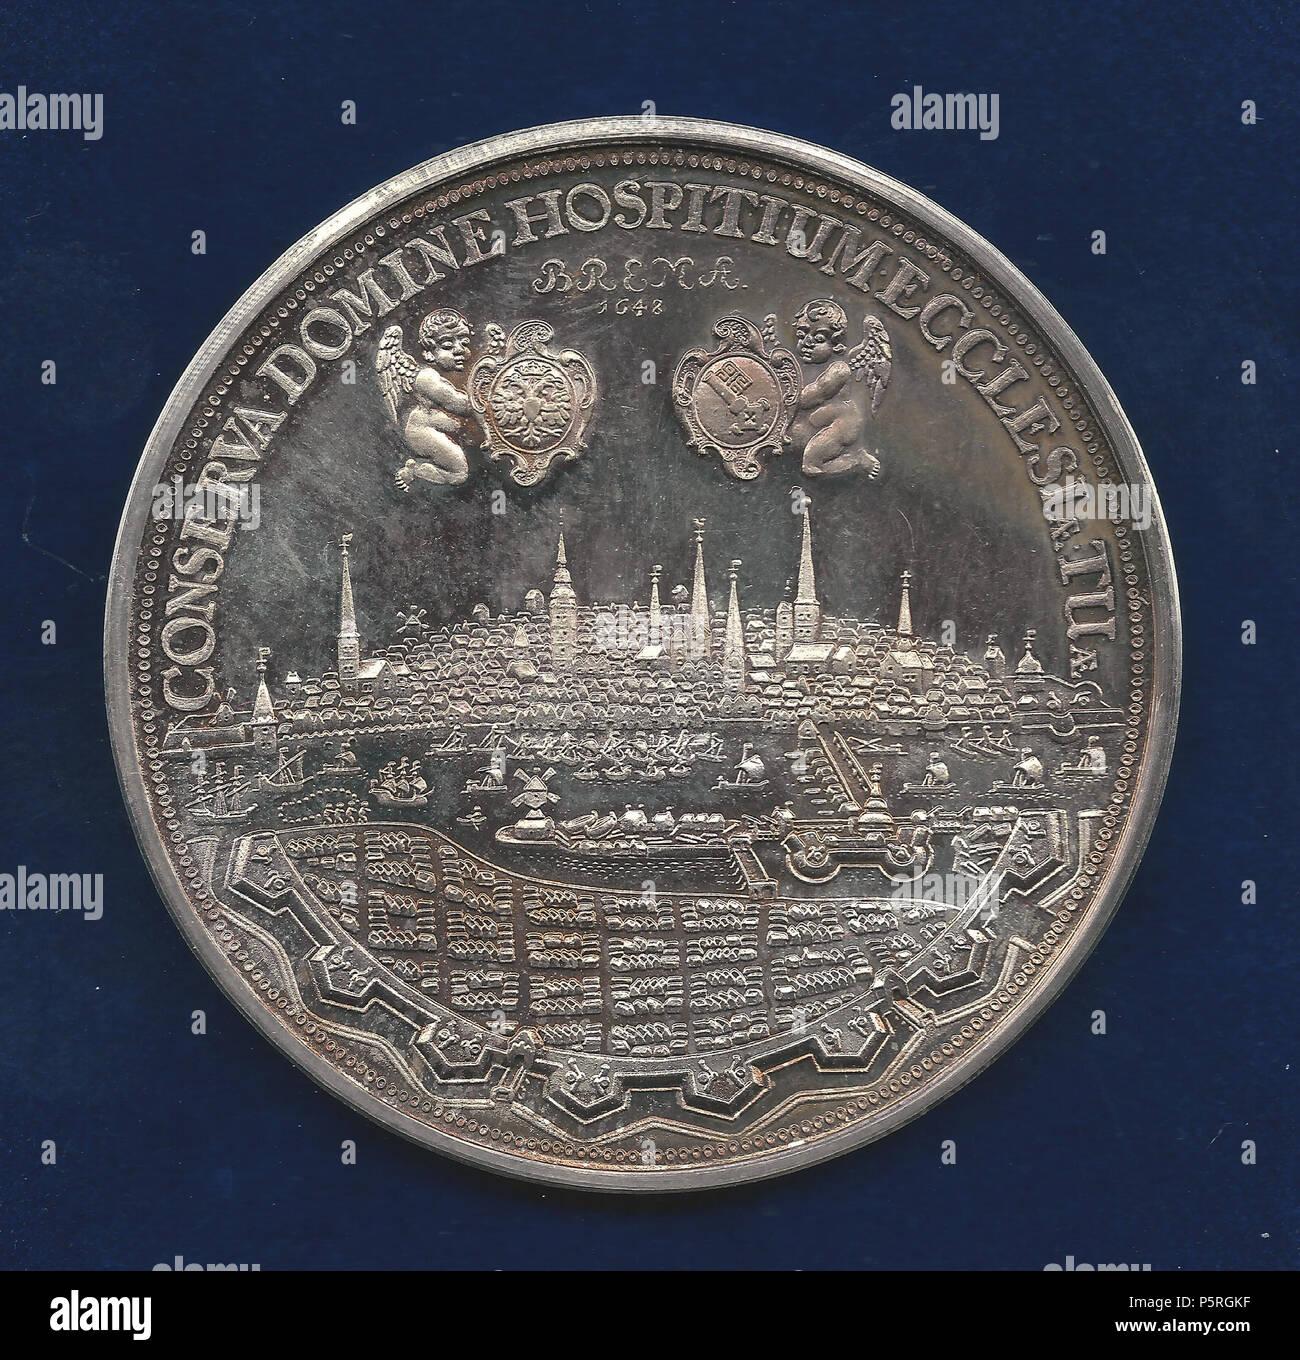 N/A. English: Medallion d. = 56 mm. 48.69 g Ag 1.000 Fine Silver Commemorating the Peace of Westphalia after the Thirty Years' War Curved above the Bremen Roland: 'STATUA ROLANDI BREMENSIS'/ City view with a bridge over the river Weser with ships. Above 2 flying angels holding the shields of the emperor l., and of the Free City of Bremen r., and dividing 2 lines: 'BREMA 1648'. Curved above: 'CONSERVA DOMINE HOSPITIUM ECCLESIÆ TUÆ'. Forrer I, p. 201. According to legend, Bremen will remain free and independent for as long as Roland stands watch over the city. For this reason, it is alleged that Stock Photo